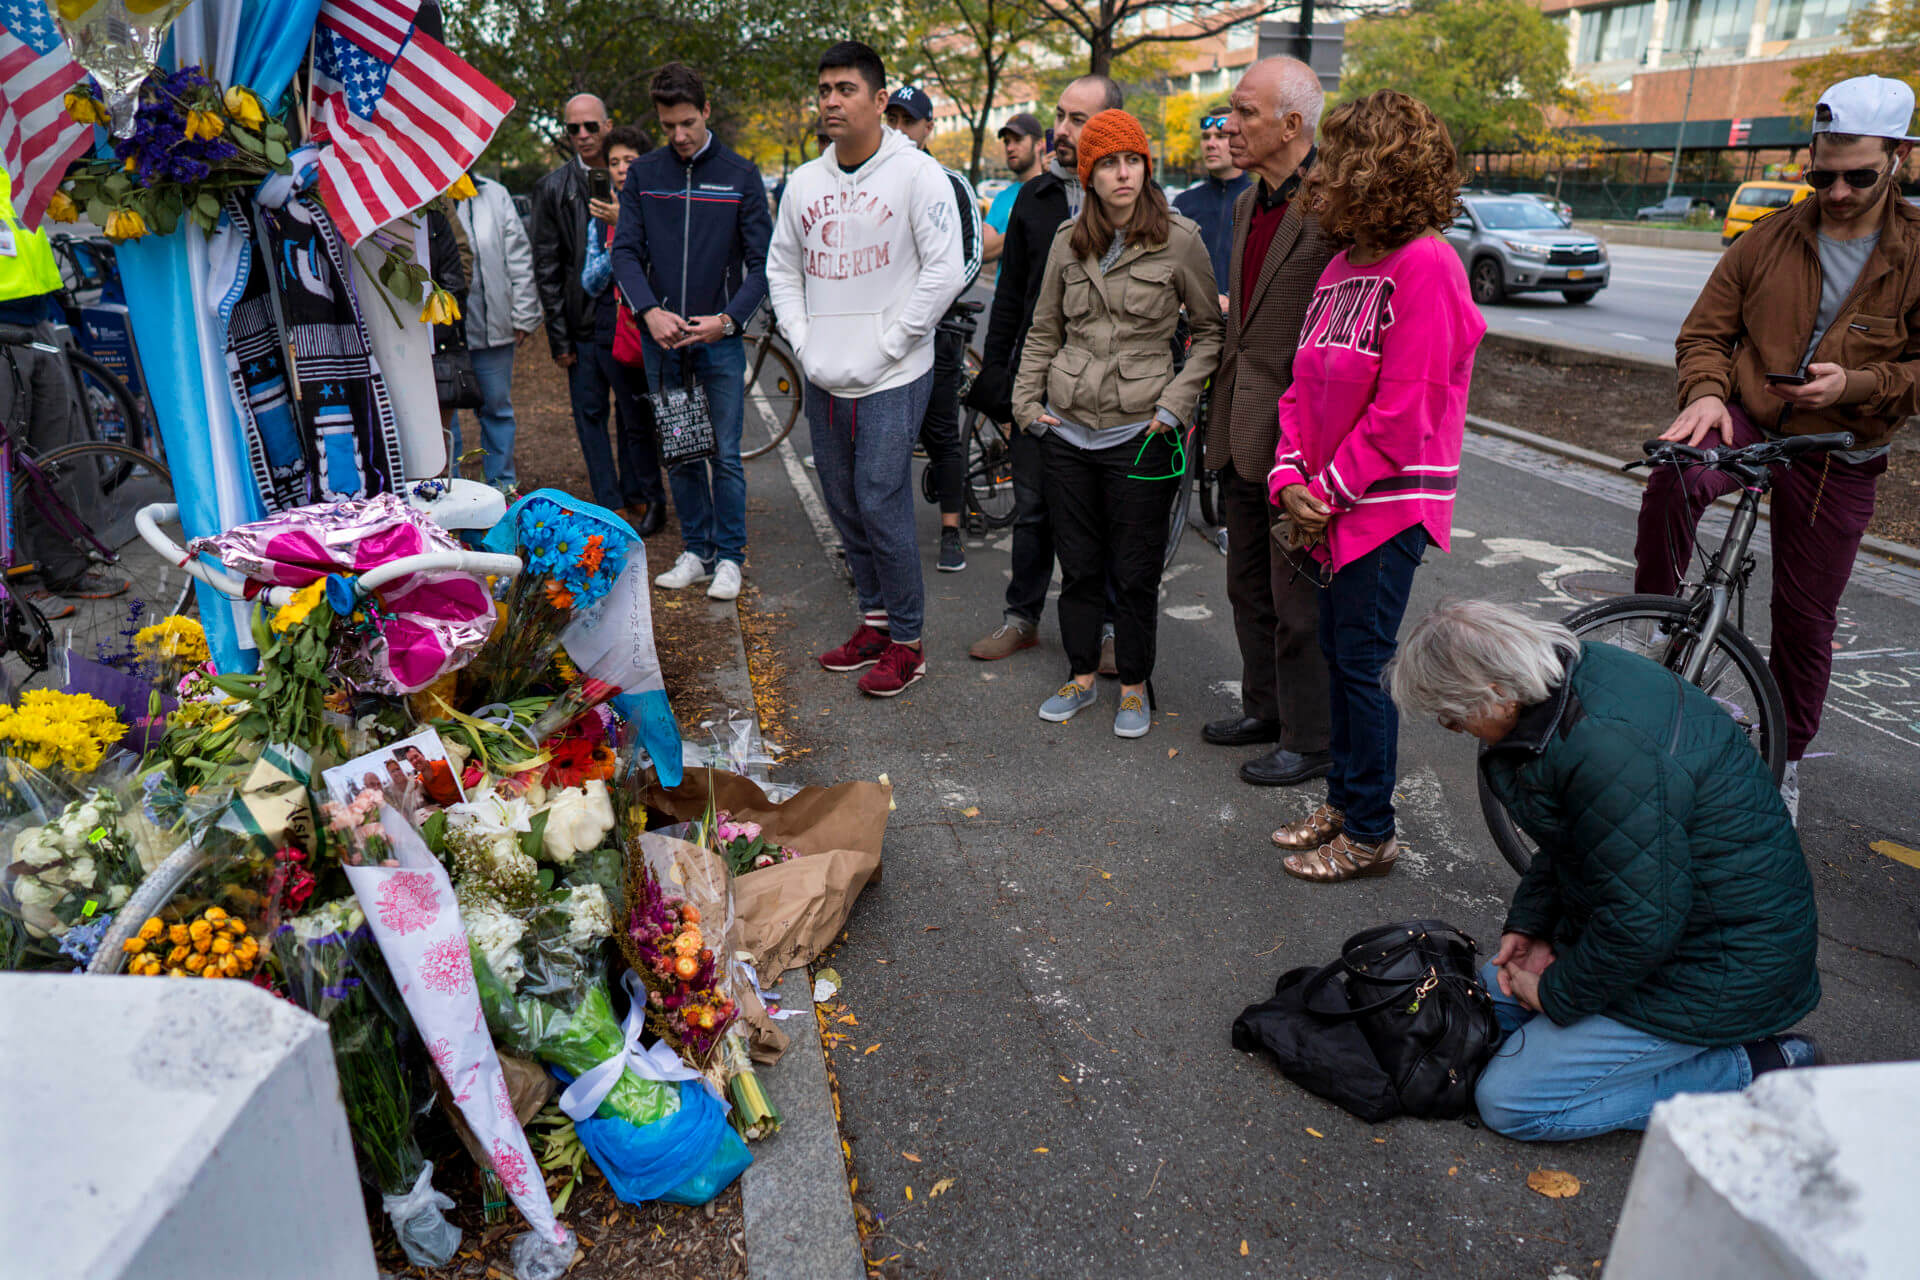 A group pauses, with some in prayer, at a makeshift memorial on a New York City bike path, on Nov. 4, 2017